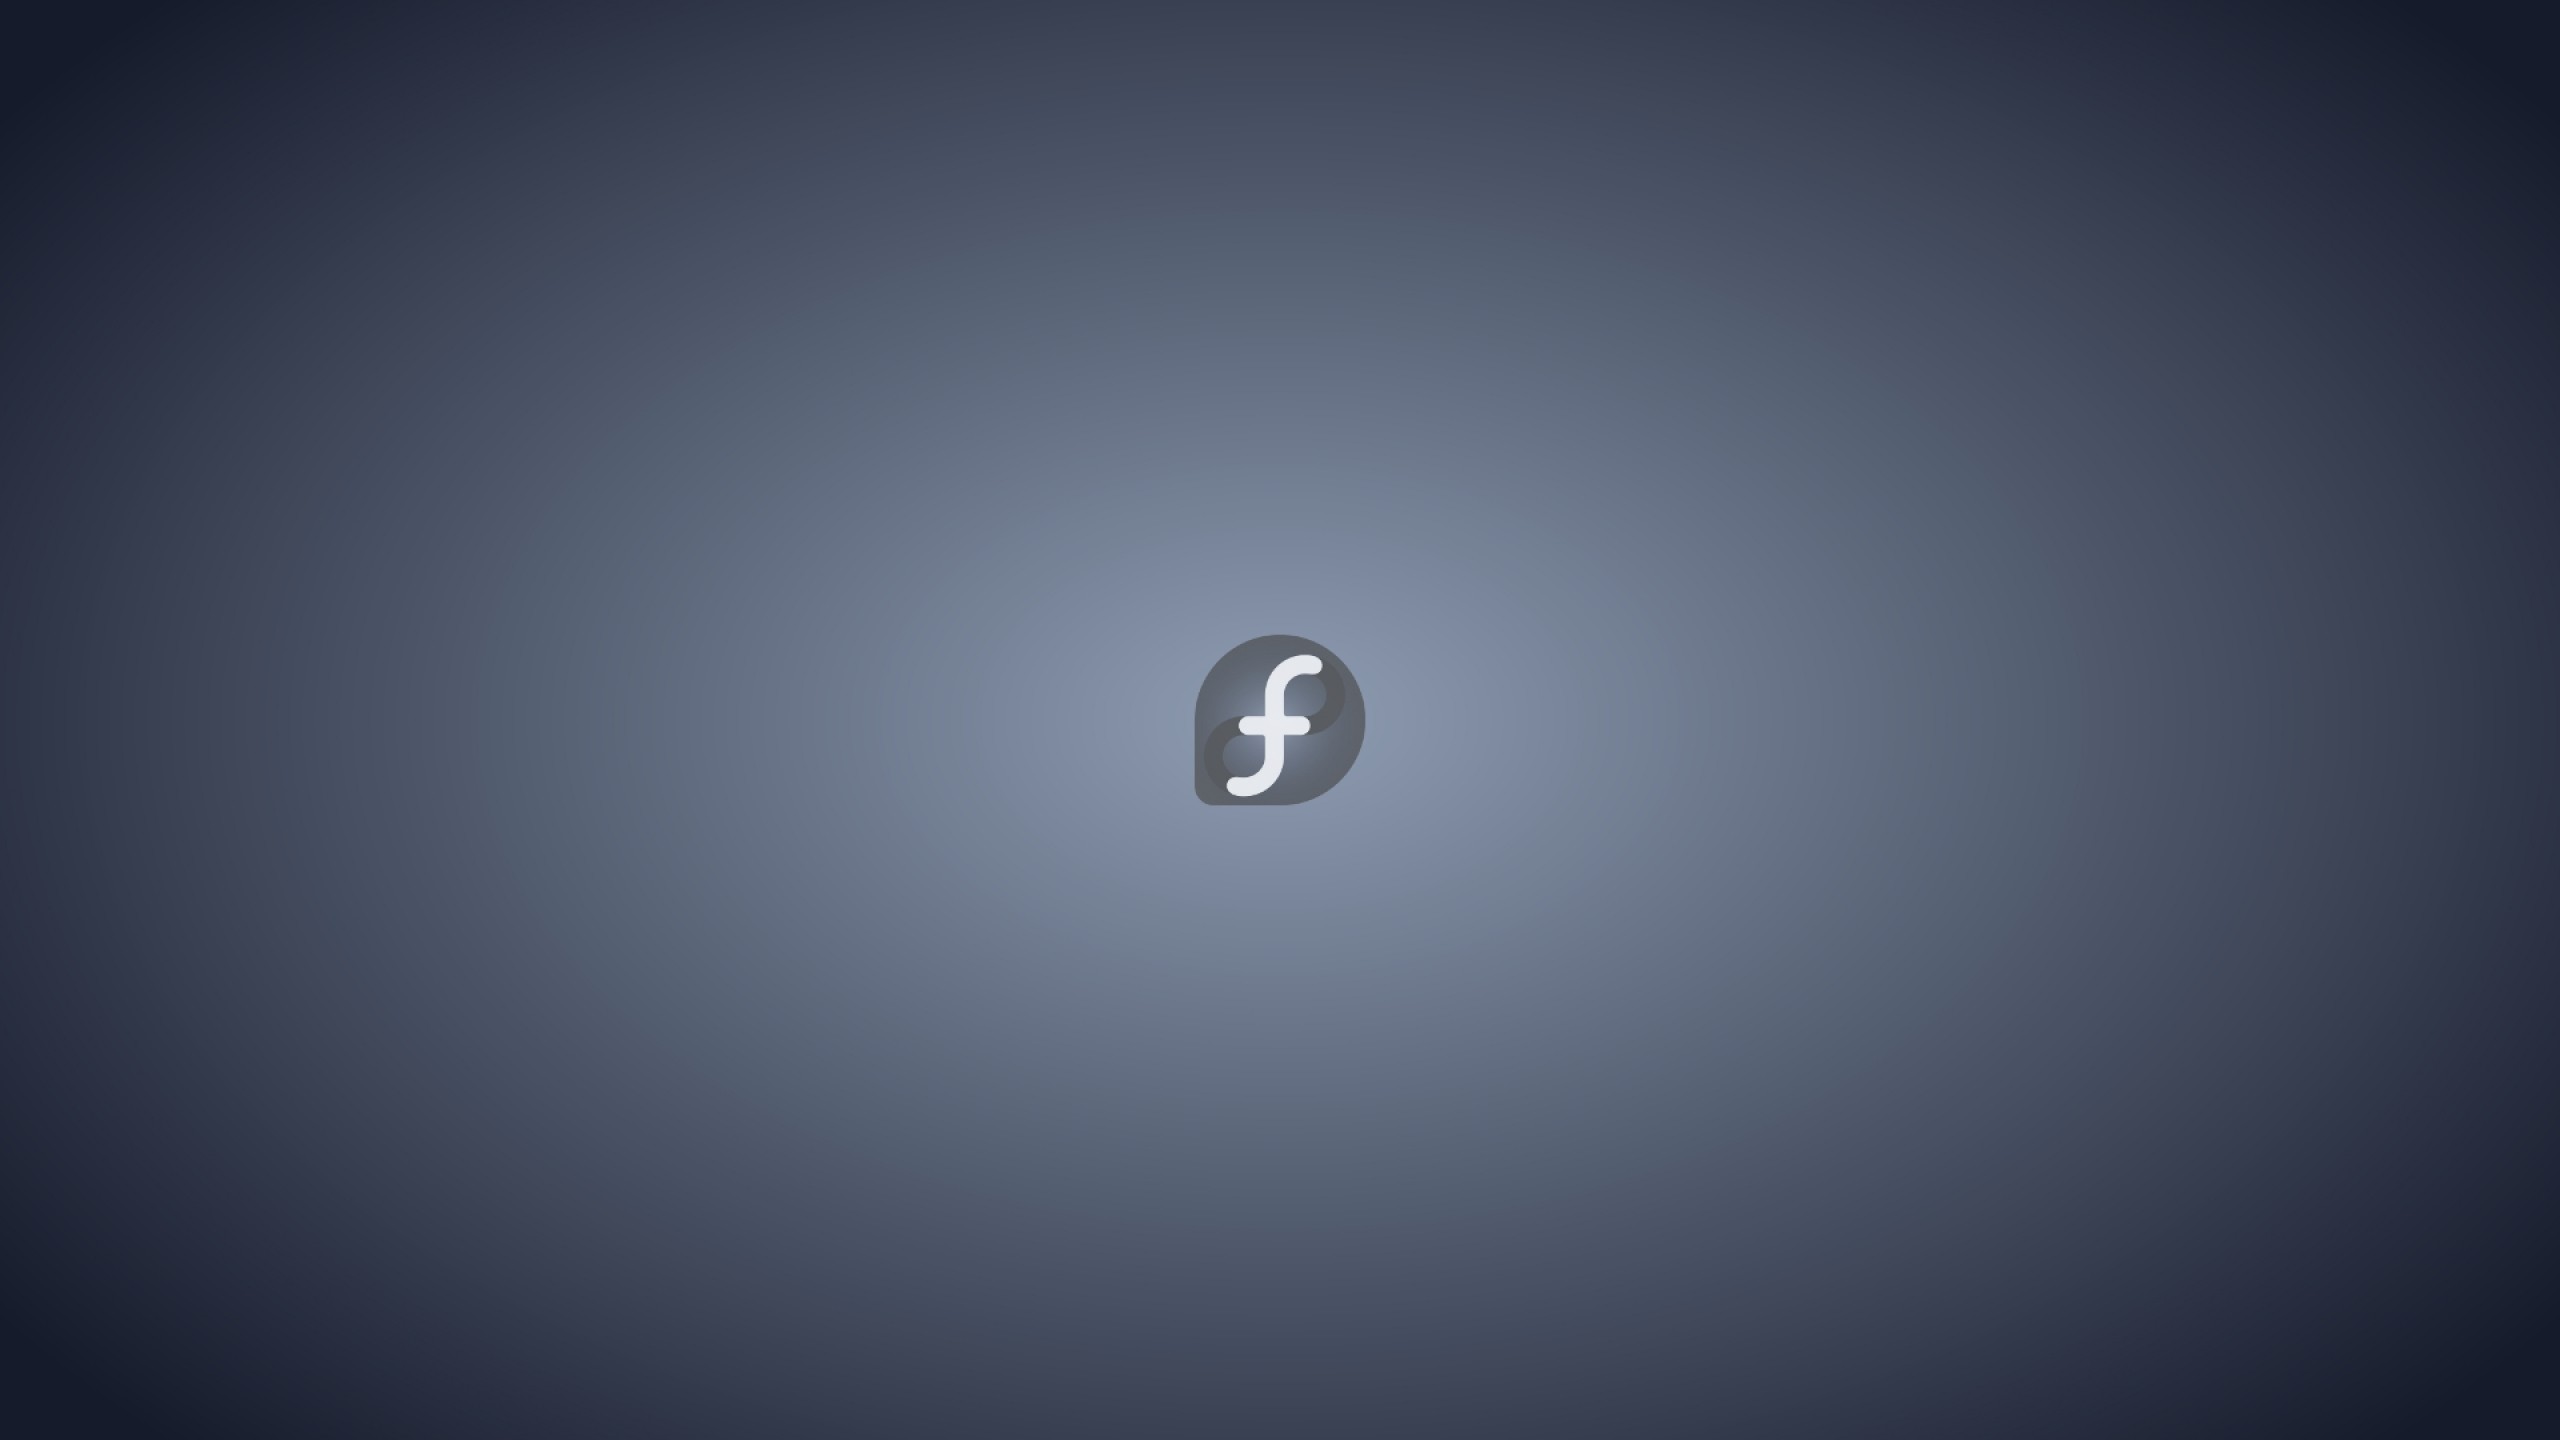 Fedora Wallpapers (@fedorawallpapers) • Instagram photos and videos